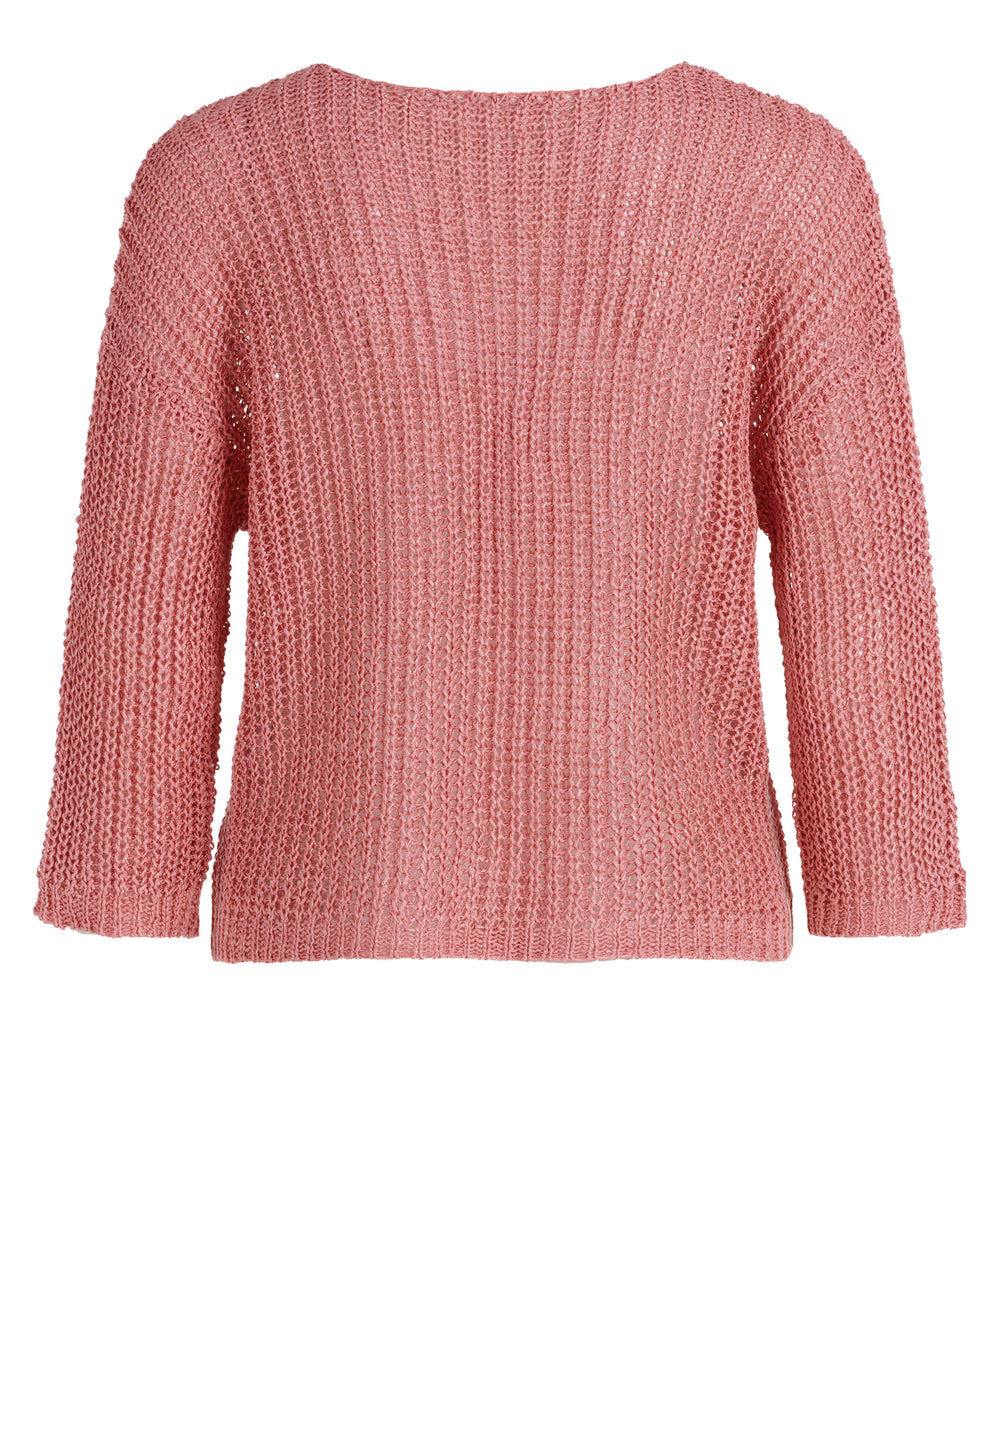 Betty Barclay 5922 1078 4026 Knitted Jumper Salmon Pink 2